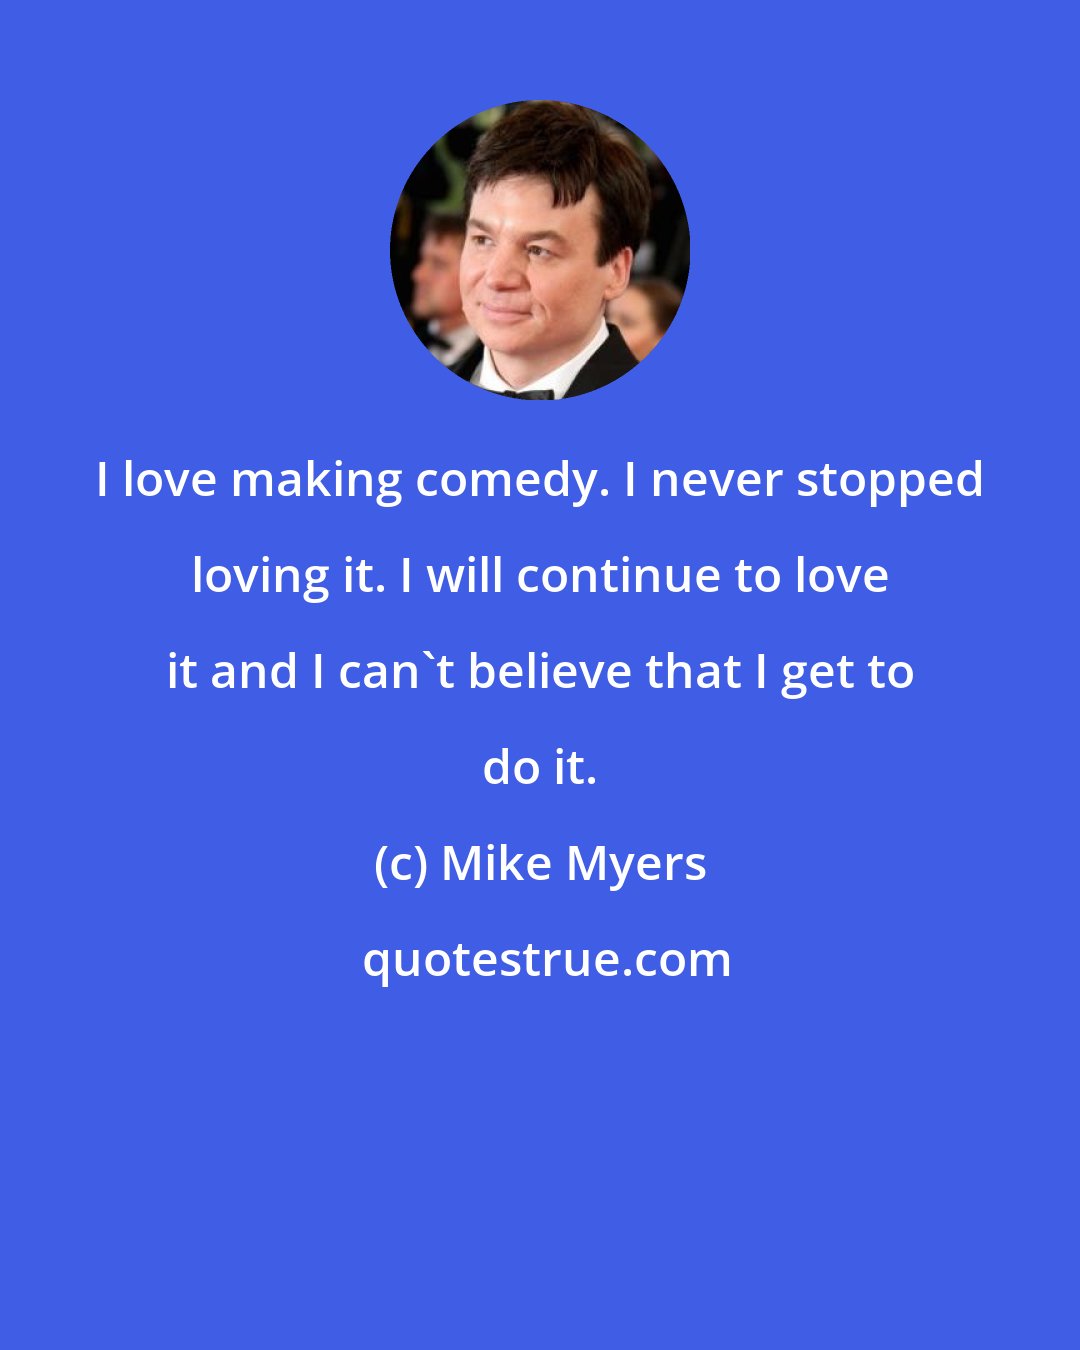 Mike Myers: I love making comedy. I never stopped loving it. I will continue to love it and I can't believe that I get to do it.